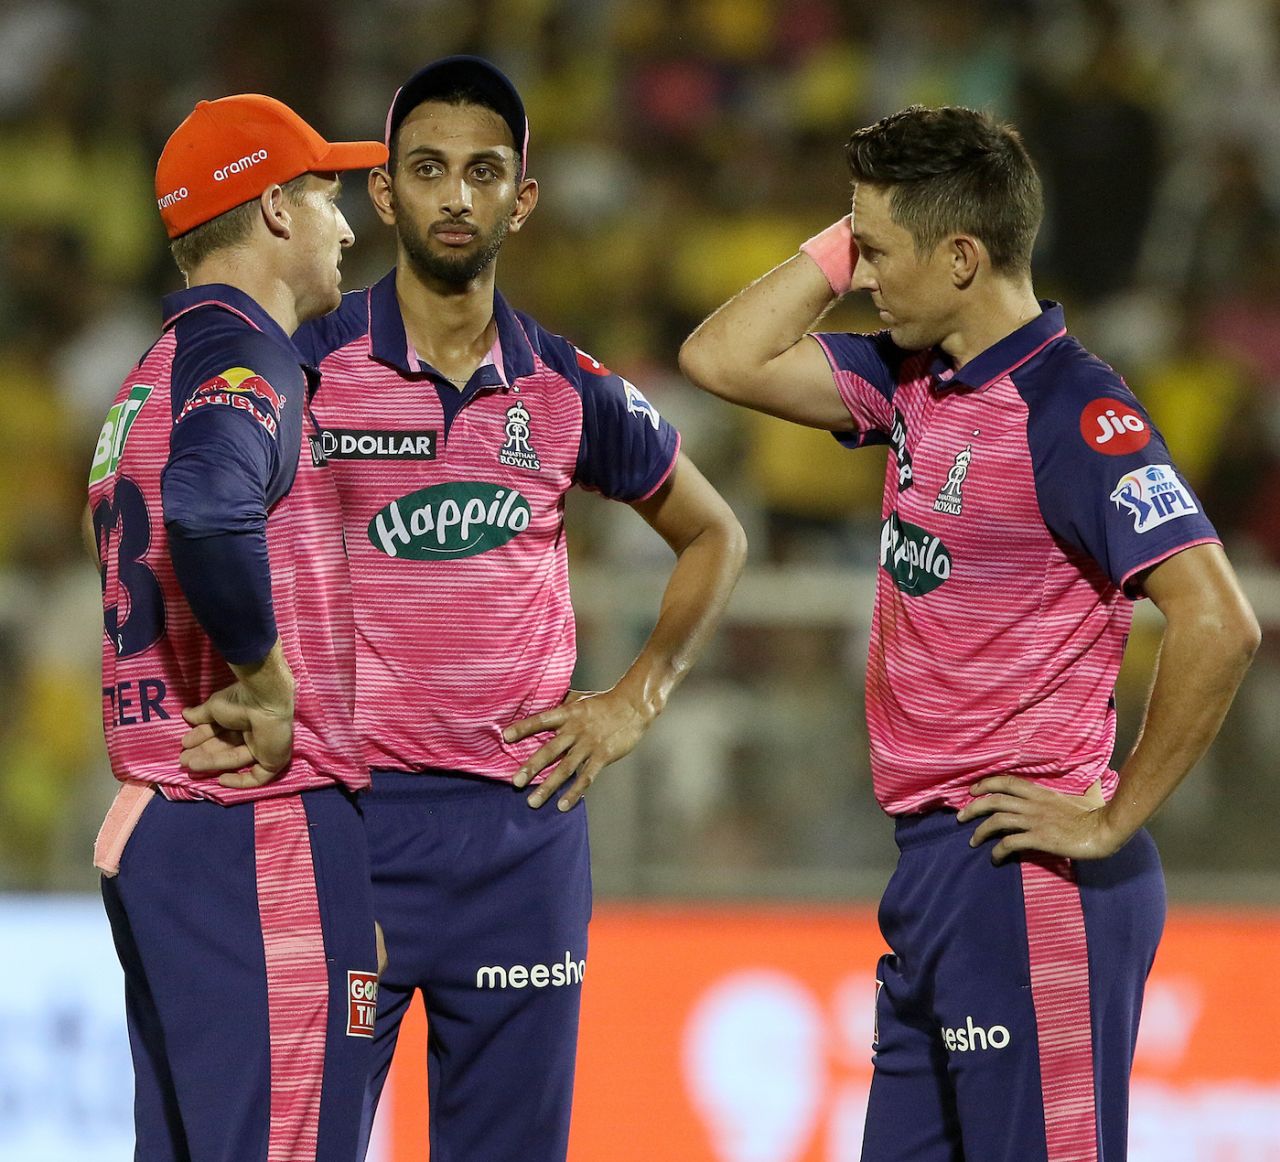 Jos Buttler, Prasidh Krishna and Trent Boult search for a solution during Moeen Ali's onslaught, Chennai Super Kings vs Rajasthan Royals, IPL 2022, Brabourne Stadium, Mumbai, May 20, 2022